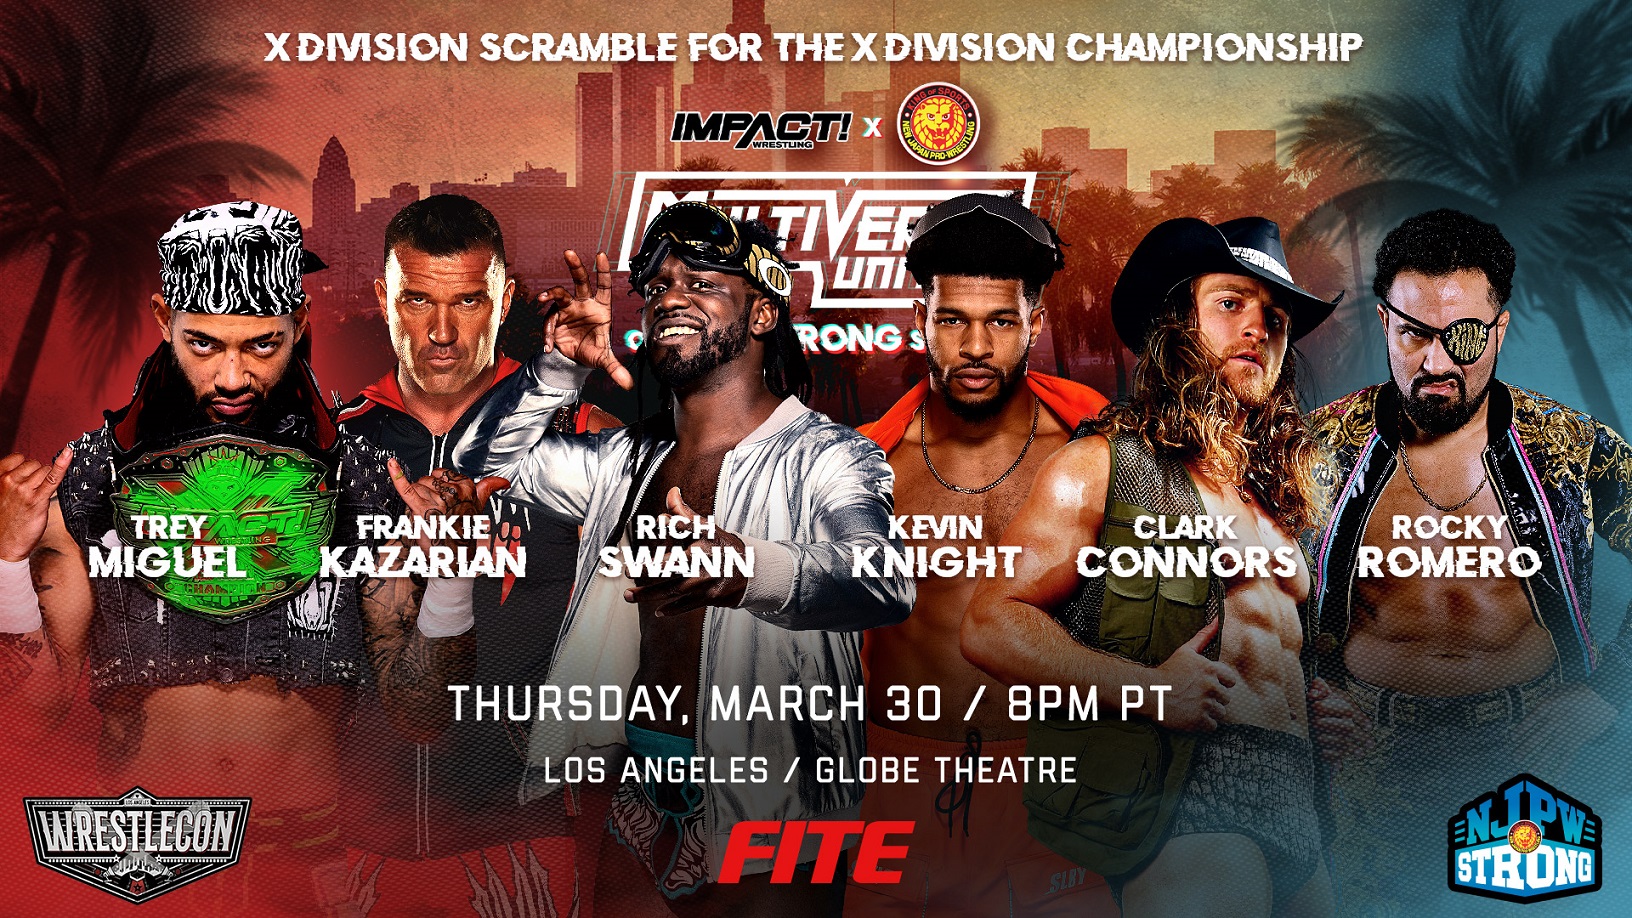 IMPACT & NJPW Stars Vie for XDivision Title in HighStakes Scramble